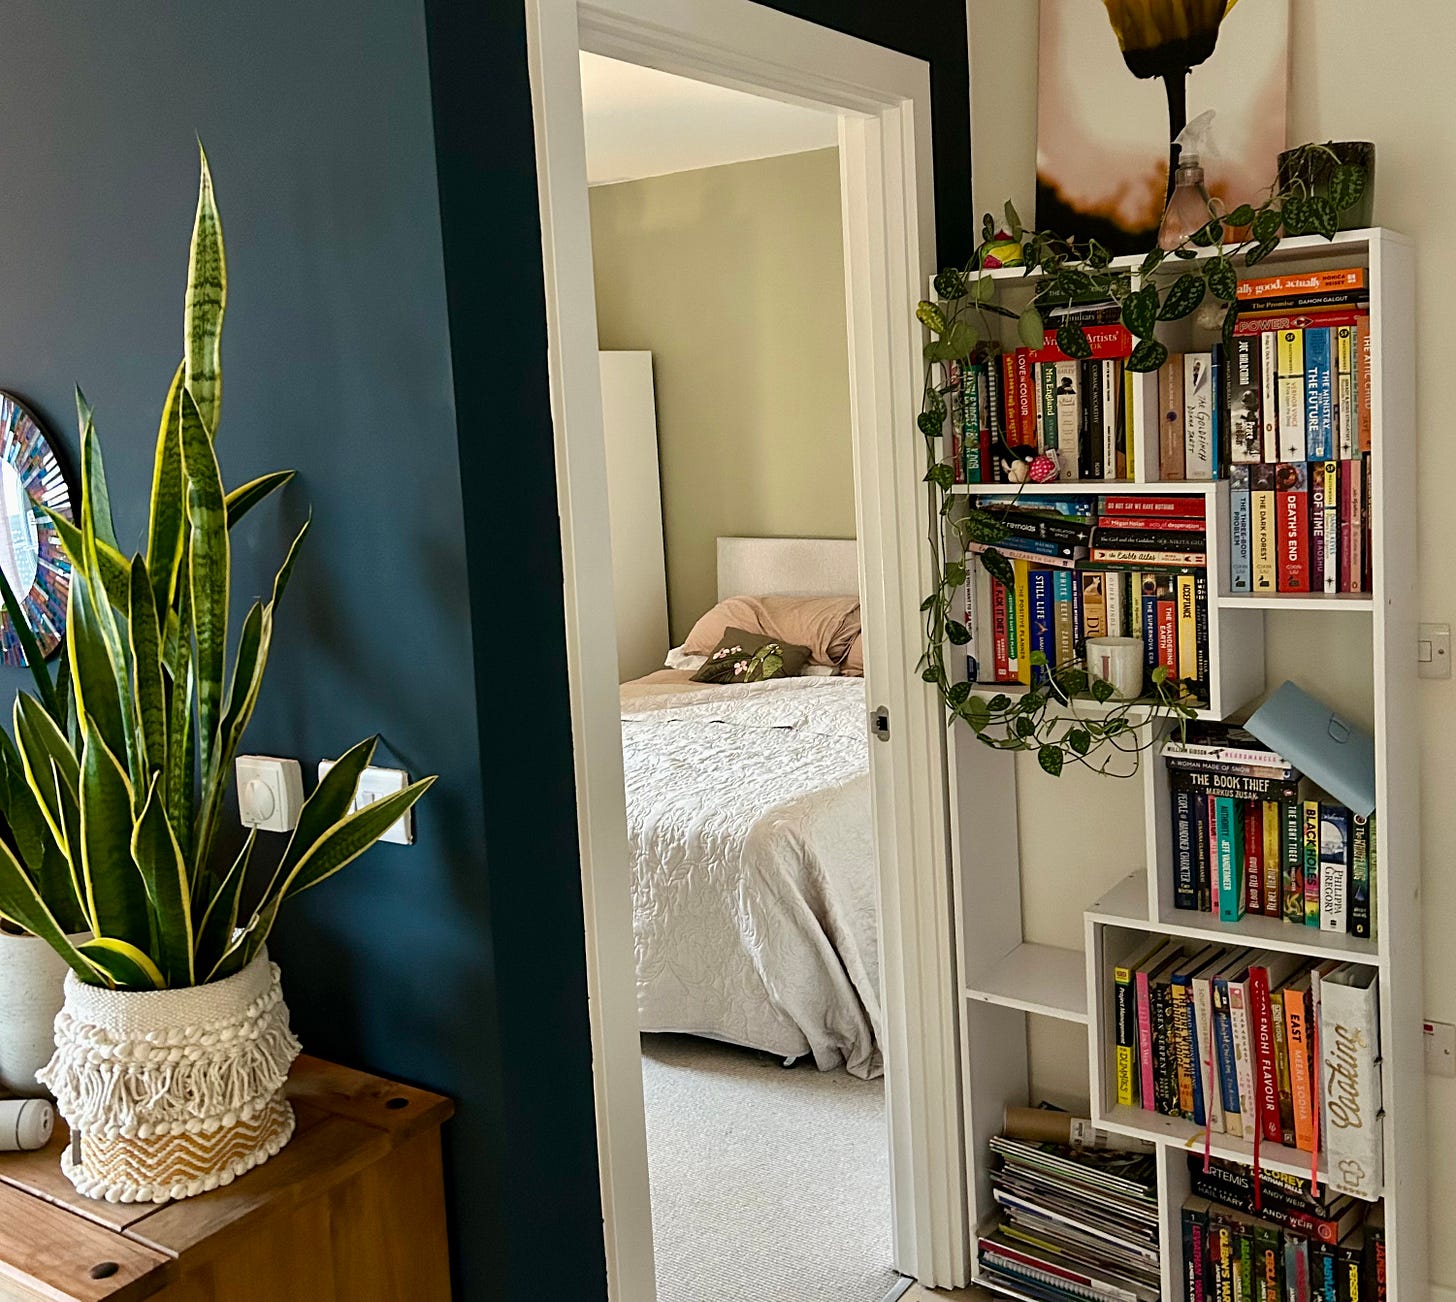 The image shows a bookshelf and a snake plant on a sideboard next to an open door to the bedroom.